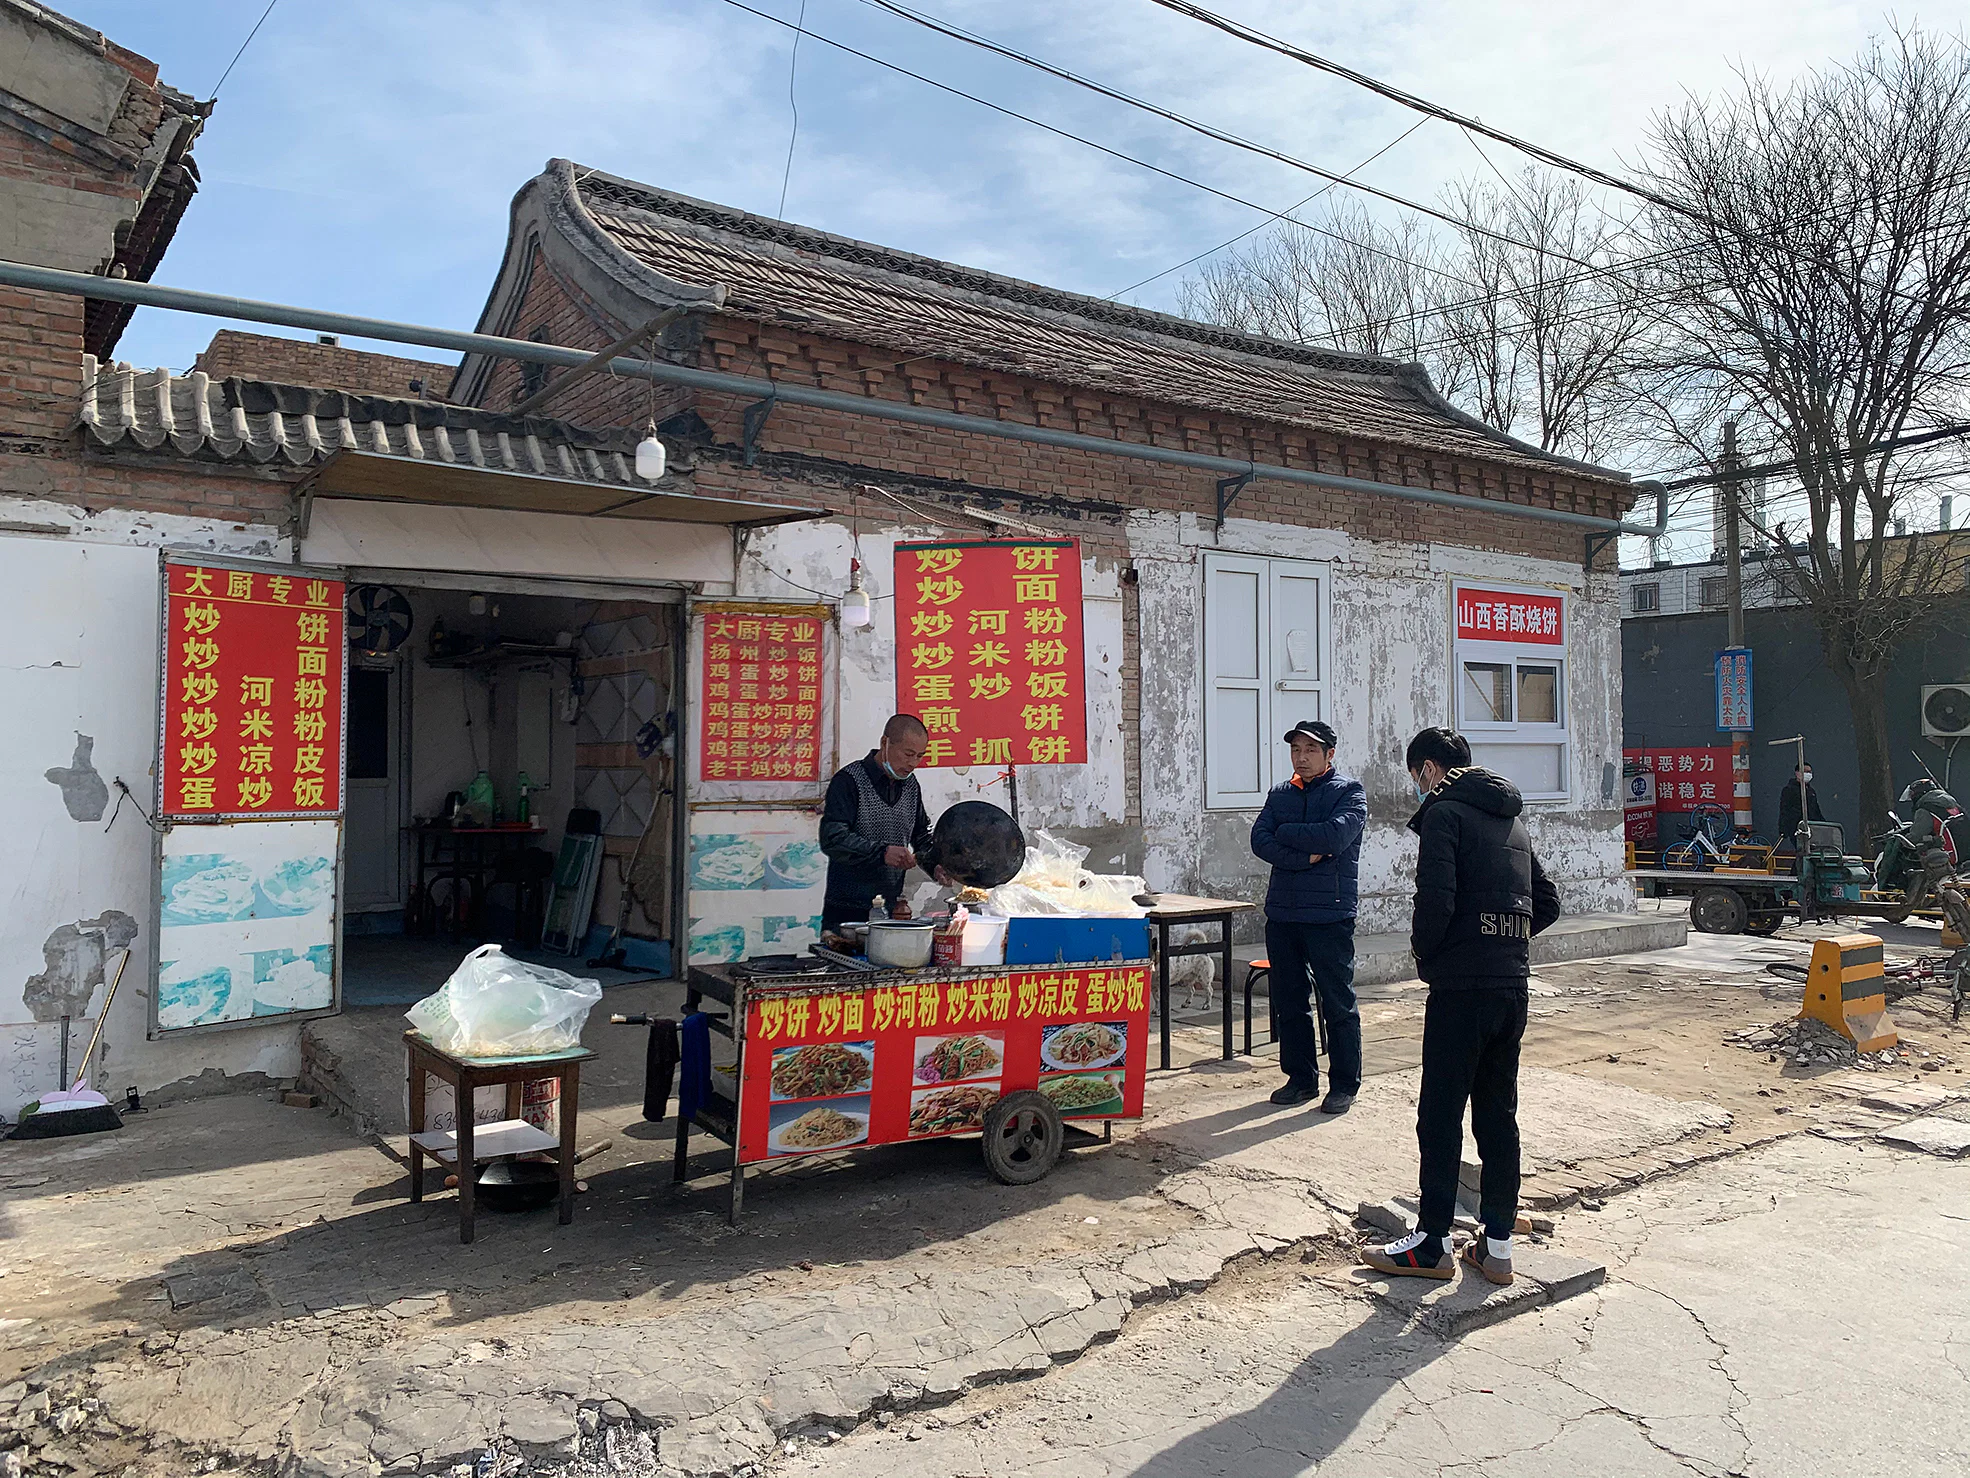 A street vendor gets busy near the Majuqiao market that is a magnet for rural migrants seeking work in the sprawling Chinese capital. Photo: Danson Cheong.